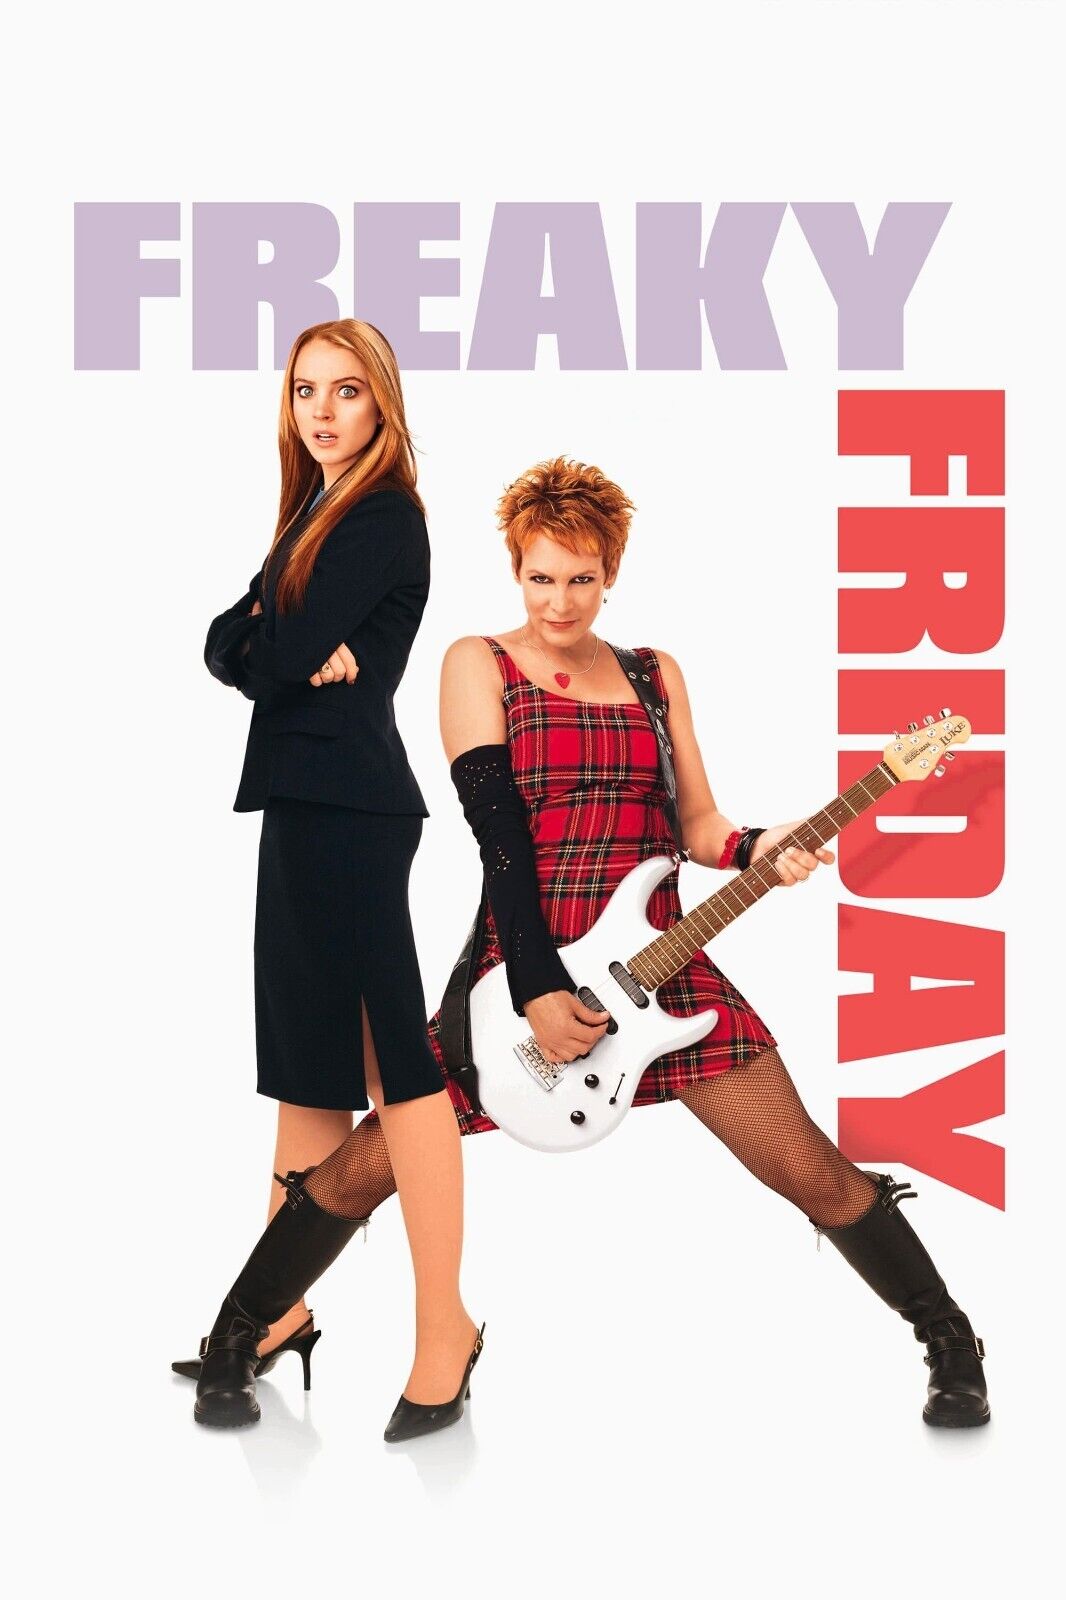 Freaky Friday Movie Poster 2003 Lindsay Lohan - 11x17 Inches | NEW USA